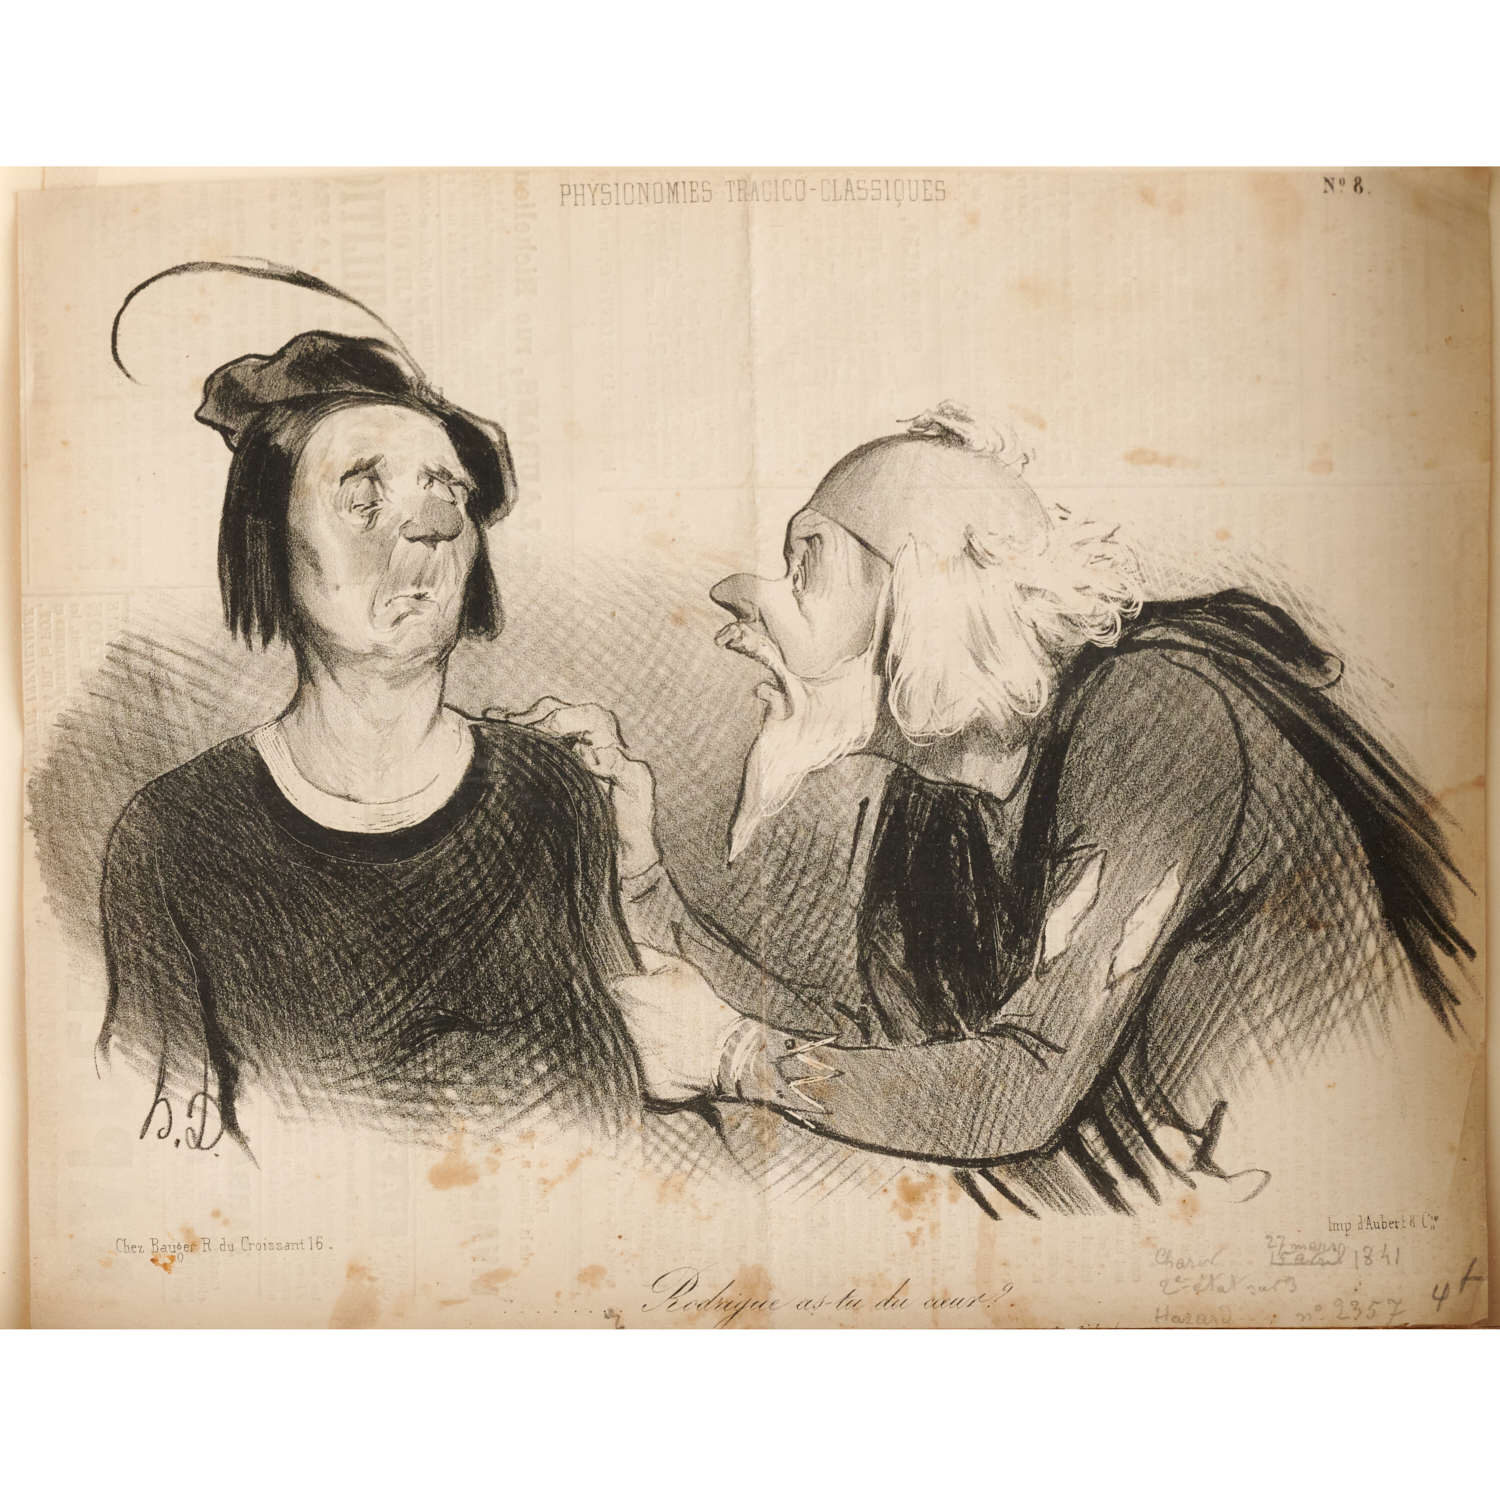 HONORE DAUMIER, LITHOGRAPH, 1841 Honore